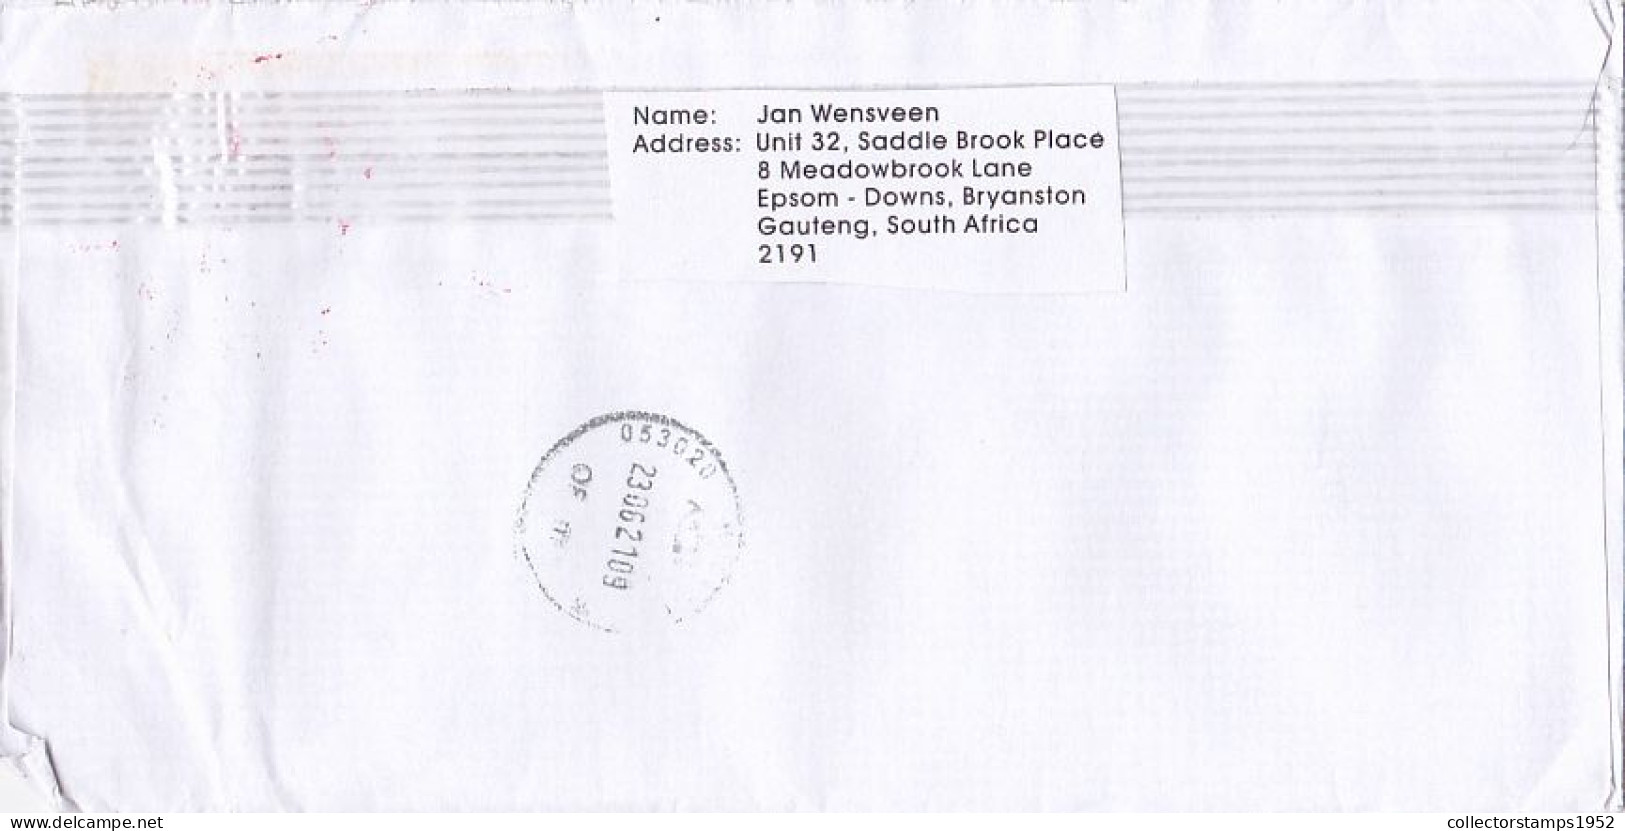 LIGHTHOUSE, MEDICINE, INDUSTRY, ARCHIOTECTURE STAMPS ON COVER, 2021, SOUTH AFRICA - Covers & Documents